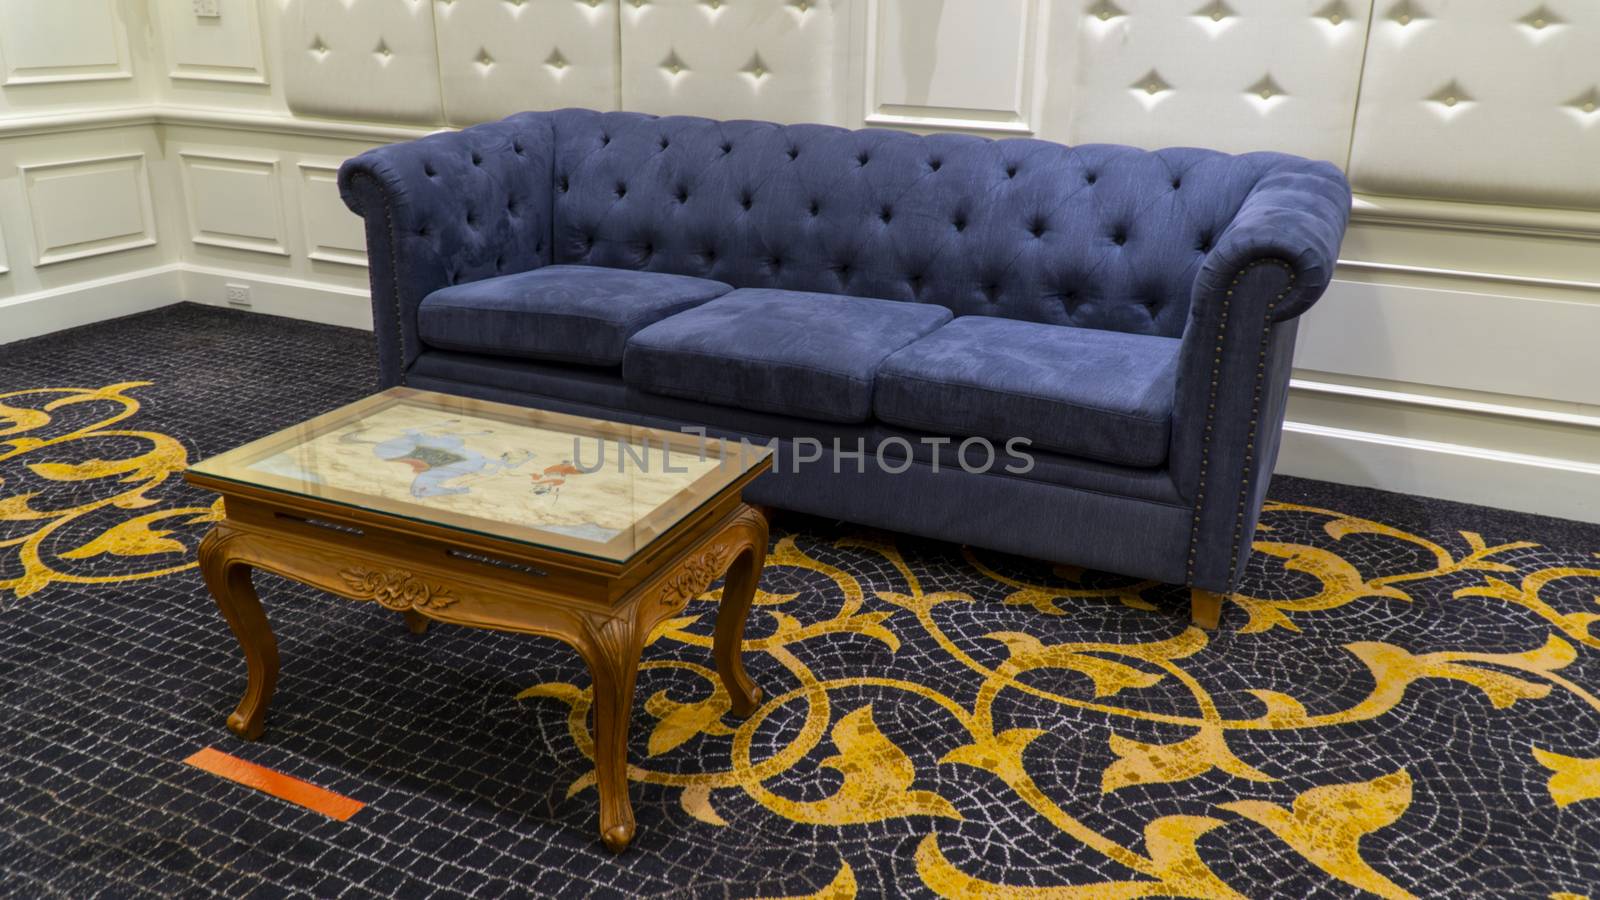 Blue vintage sofa with teak coffee table in a living room. by sonandonures